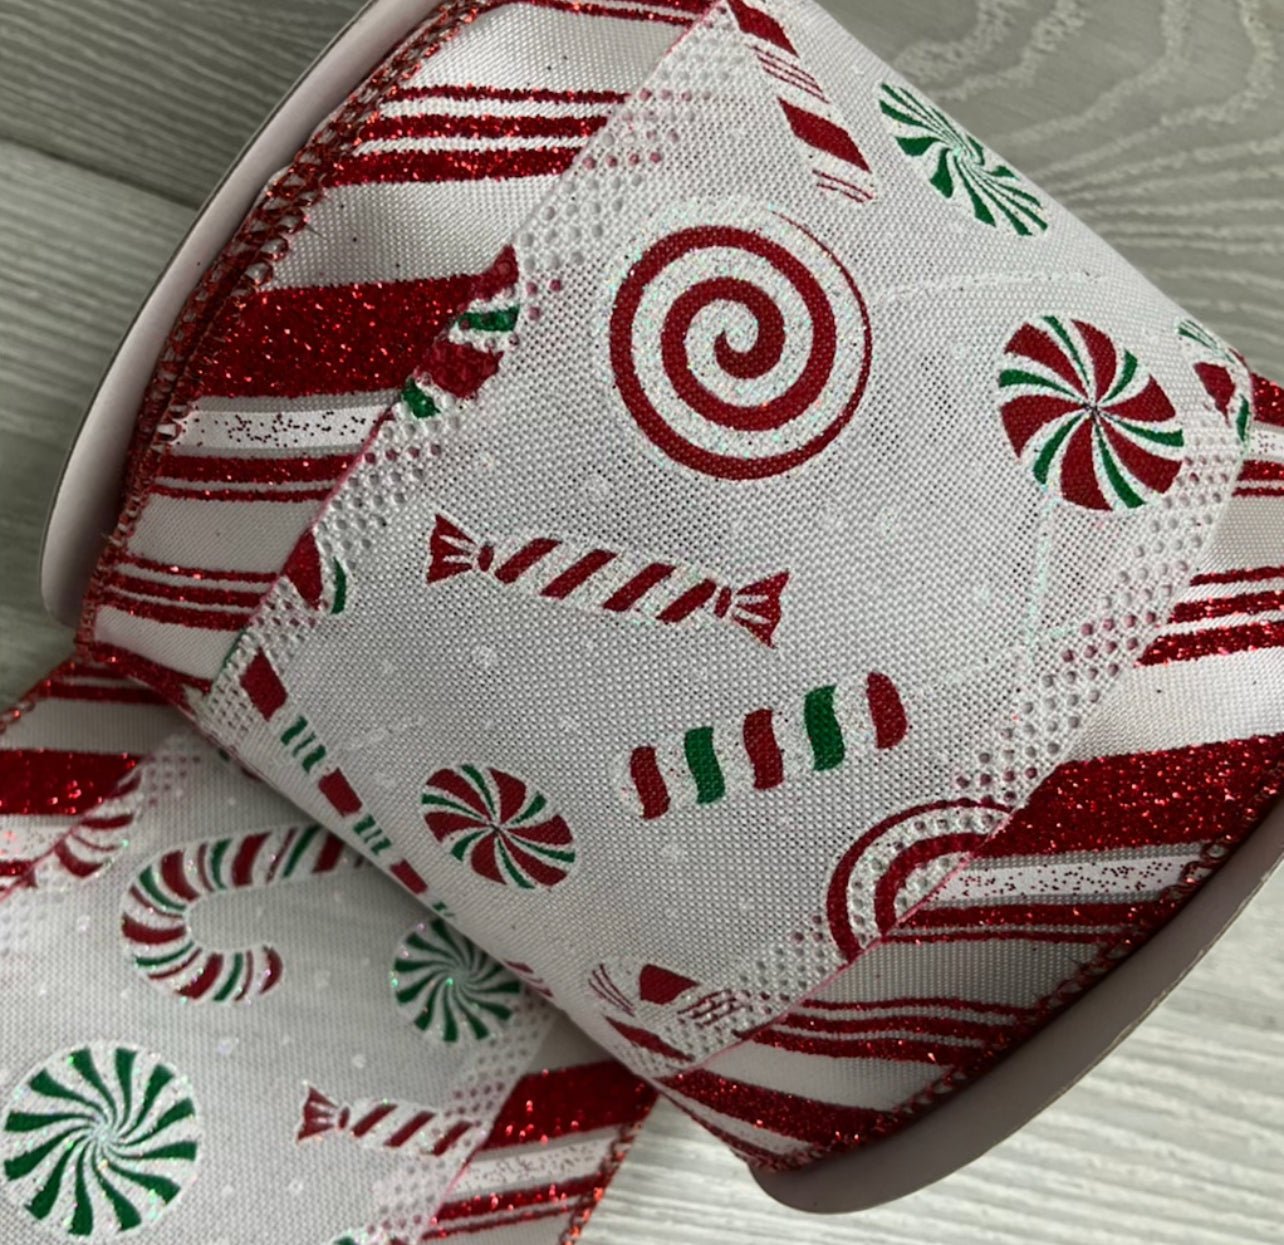 peppermint ribbon with glittered edge 4” - Greenery MarketWired ribbonMtx67777